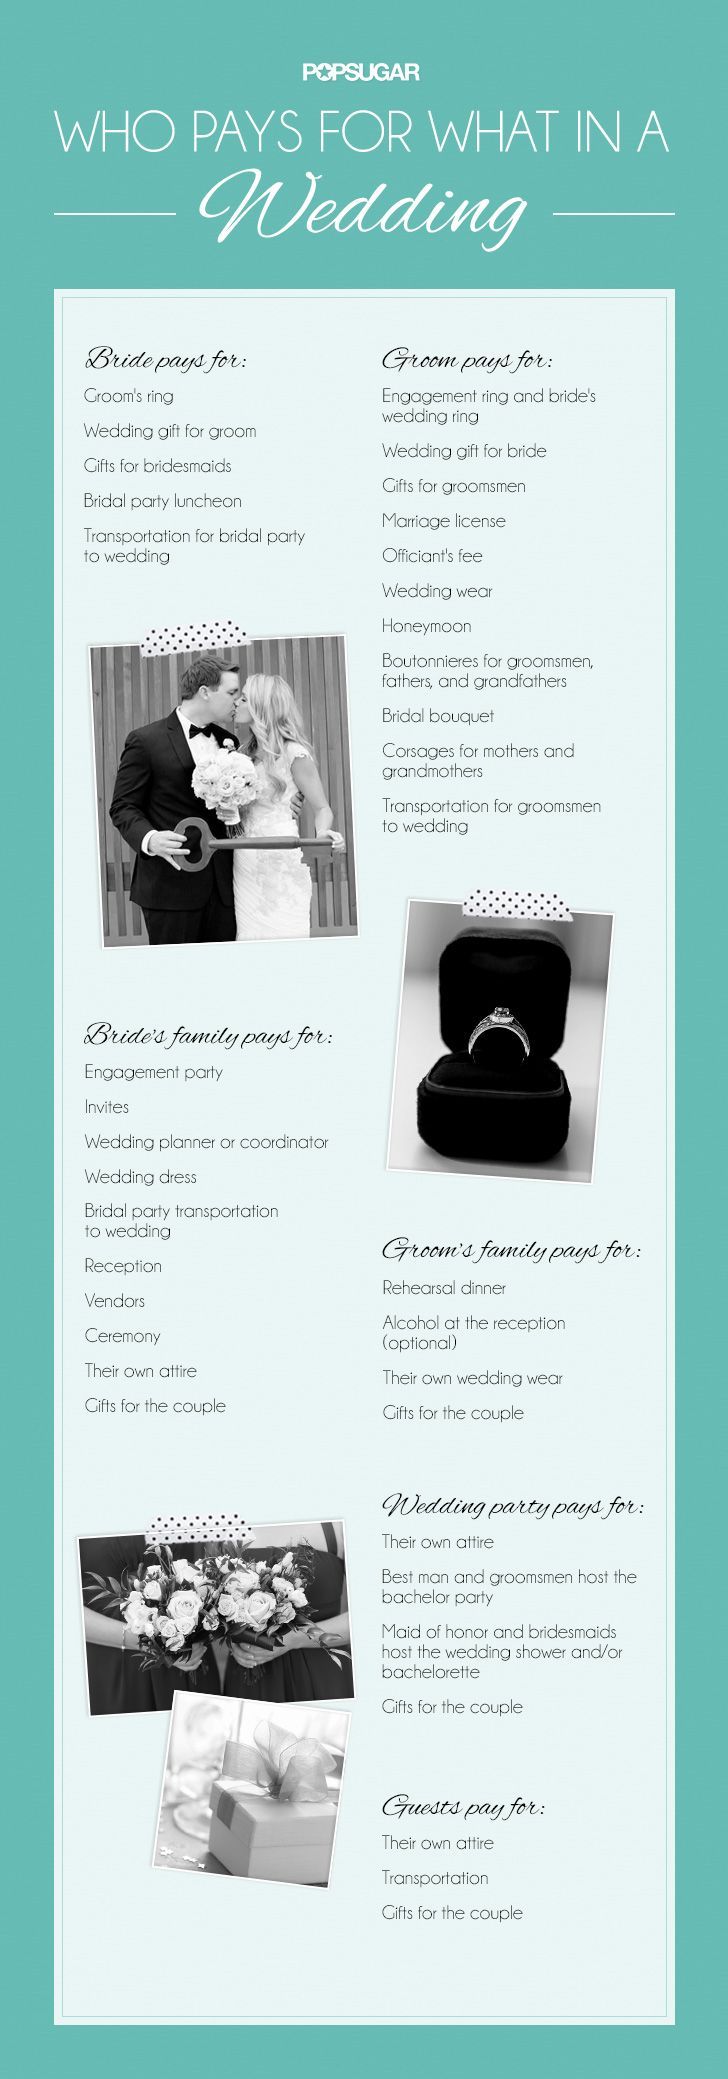 guide to who should pay for what in a wedding…self explanatory but some people don’t know the etiquette